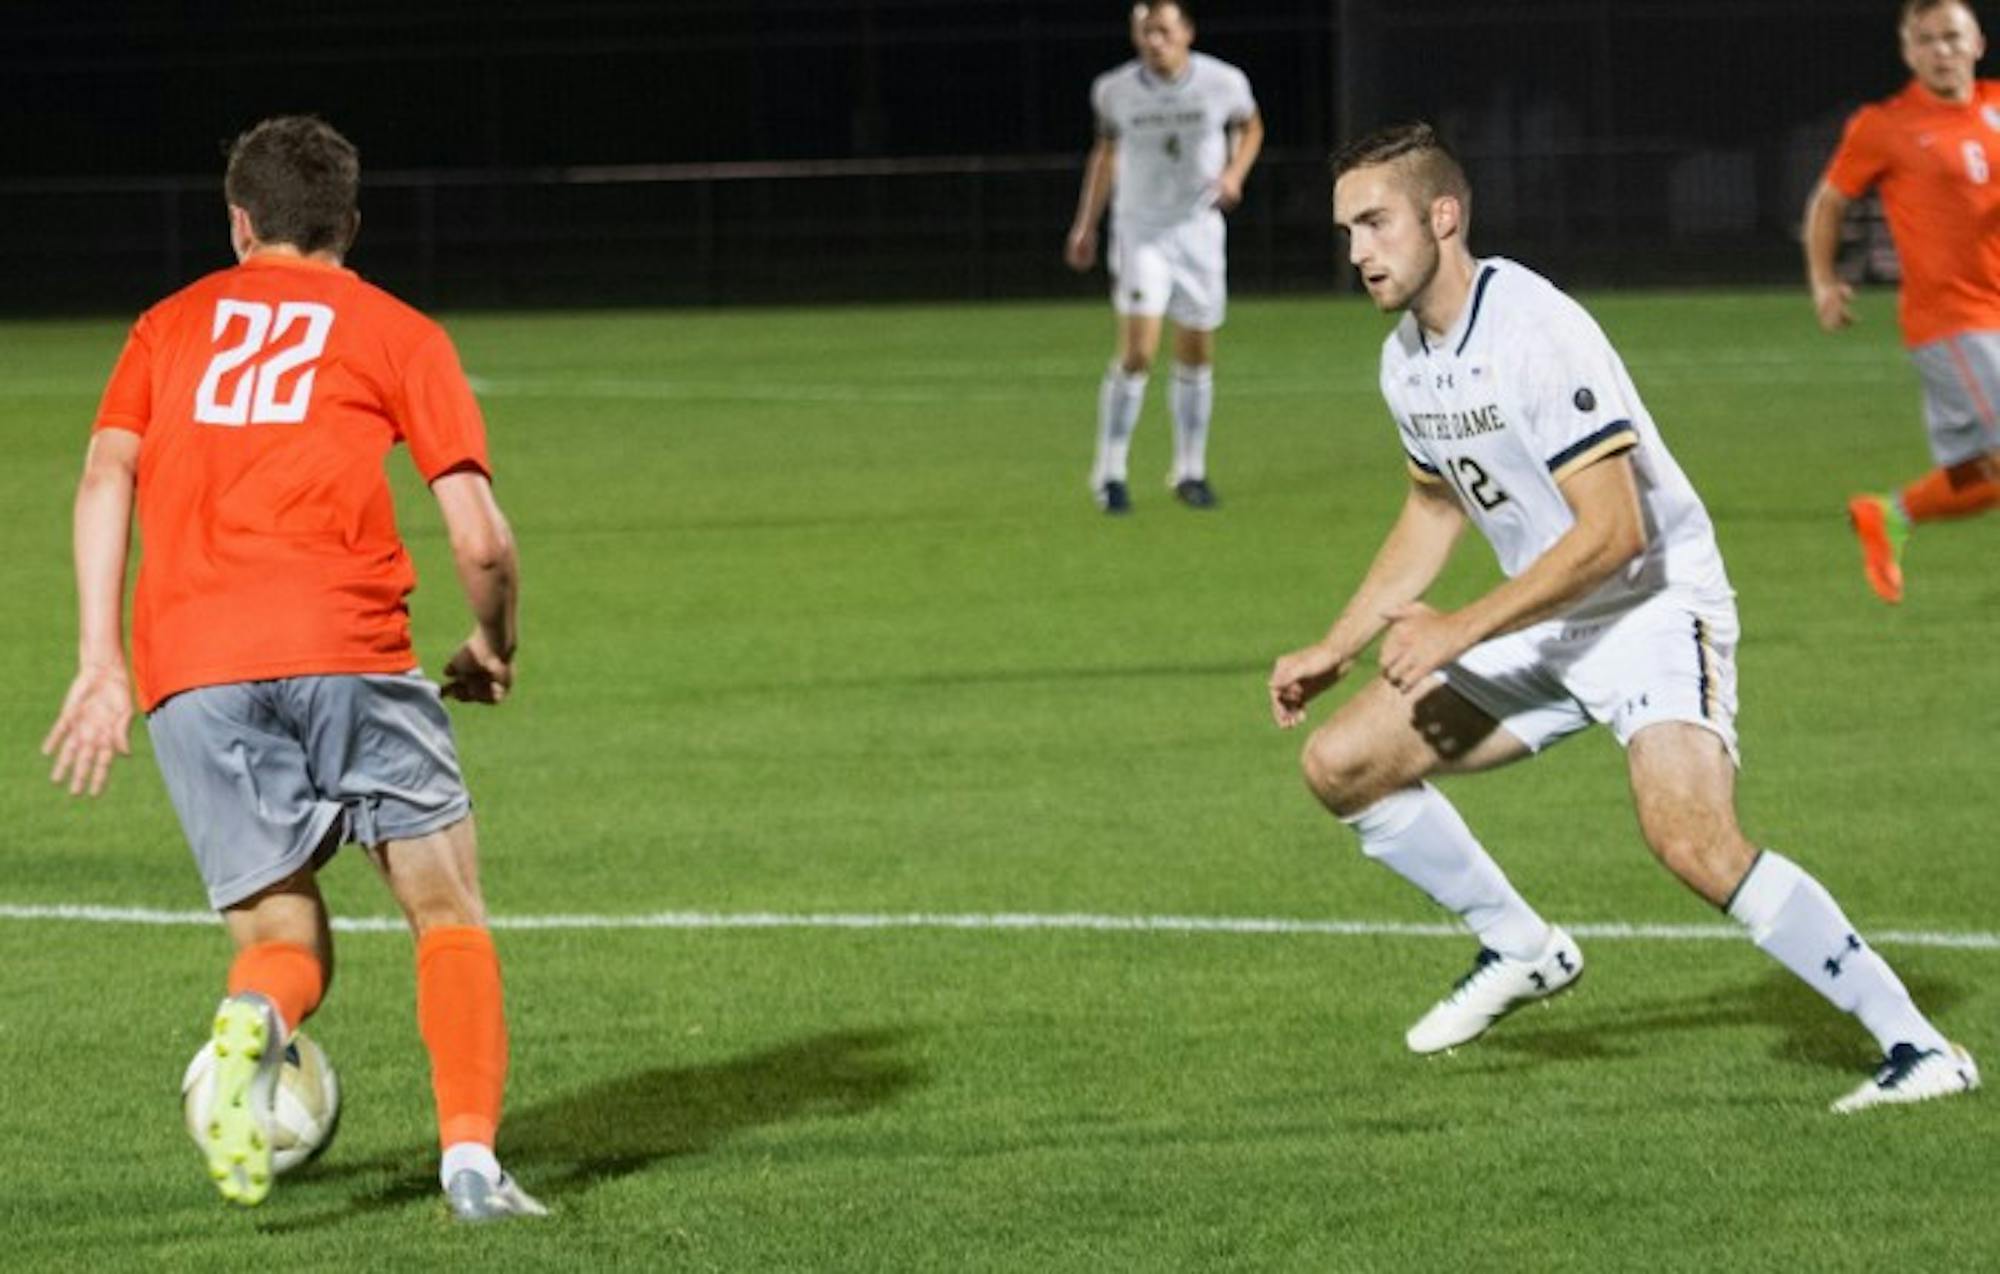 Irish senior midfielder Kyle Dedrick attempts to cut off an opponent during Notre Dame’s 2-1 win over Bowling Green on Sept. 19 at Alumni Stadium. Dedrick took one shot during the game.